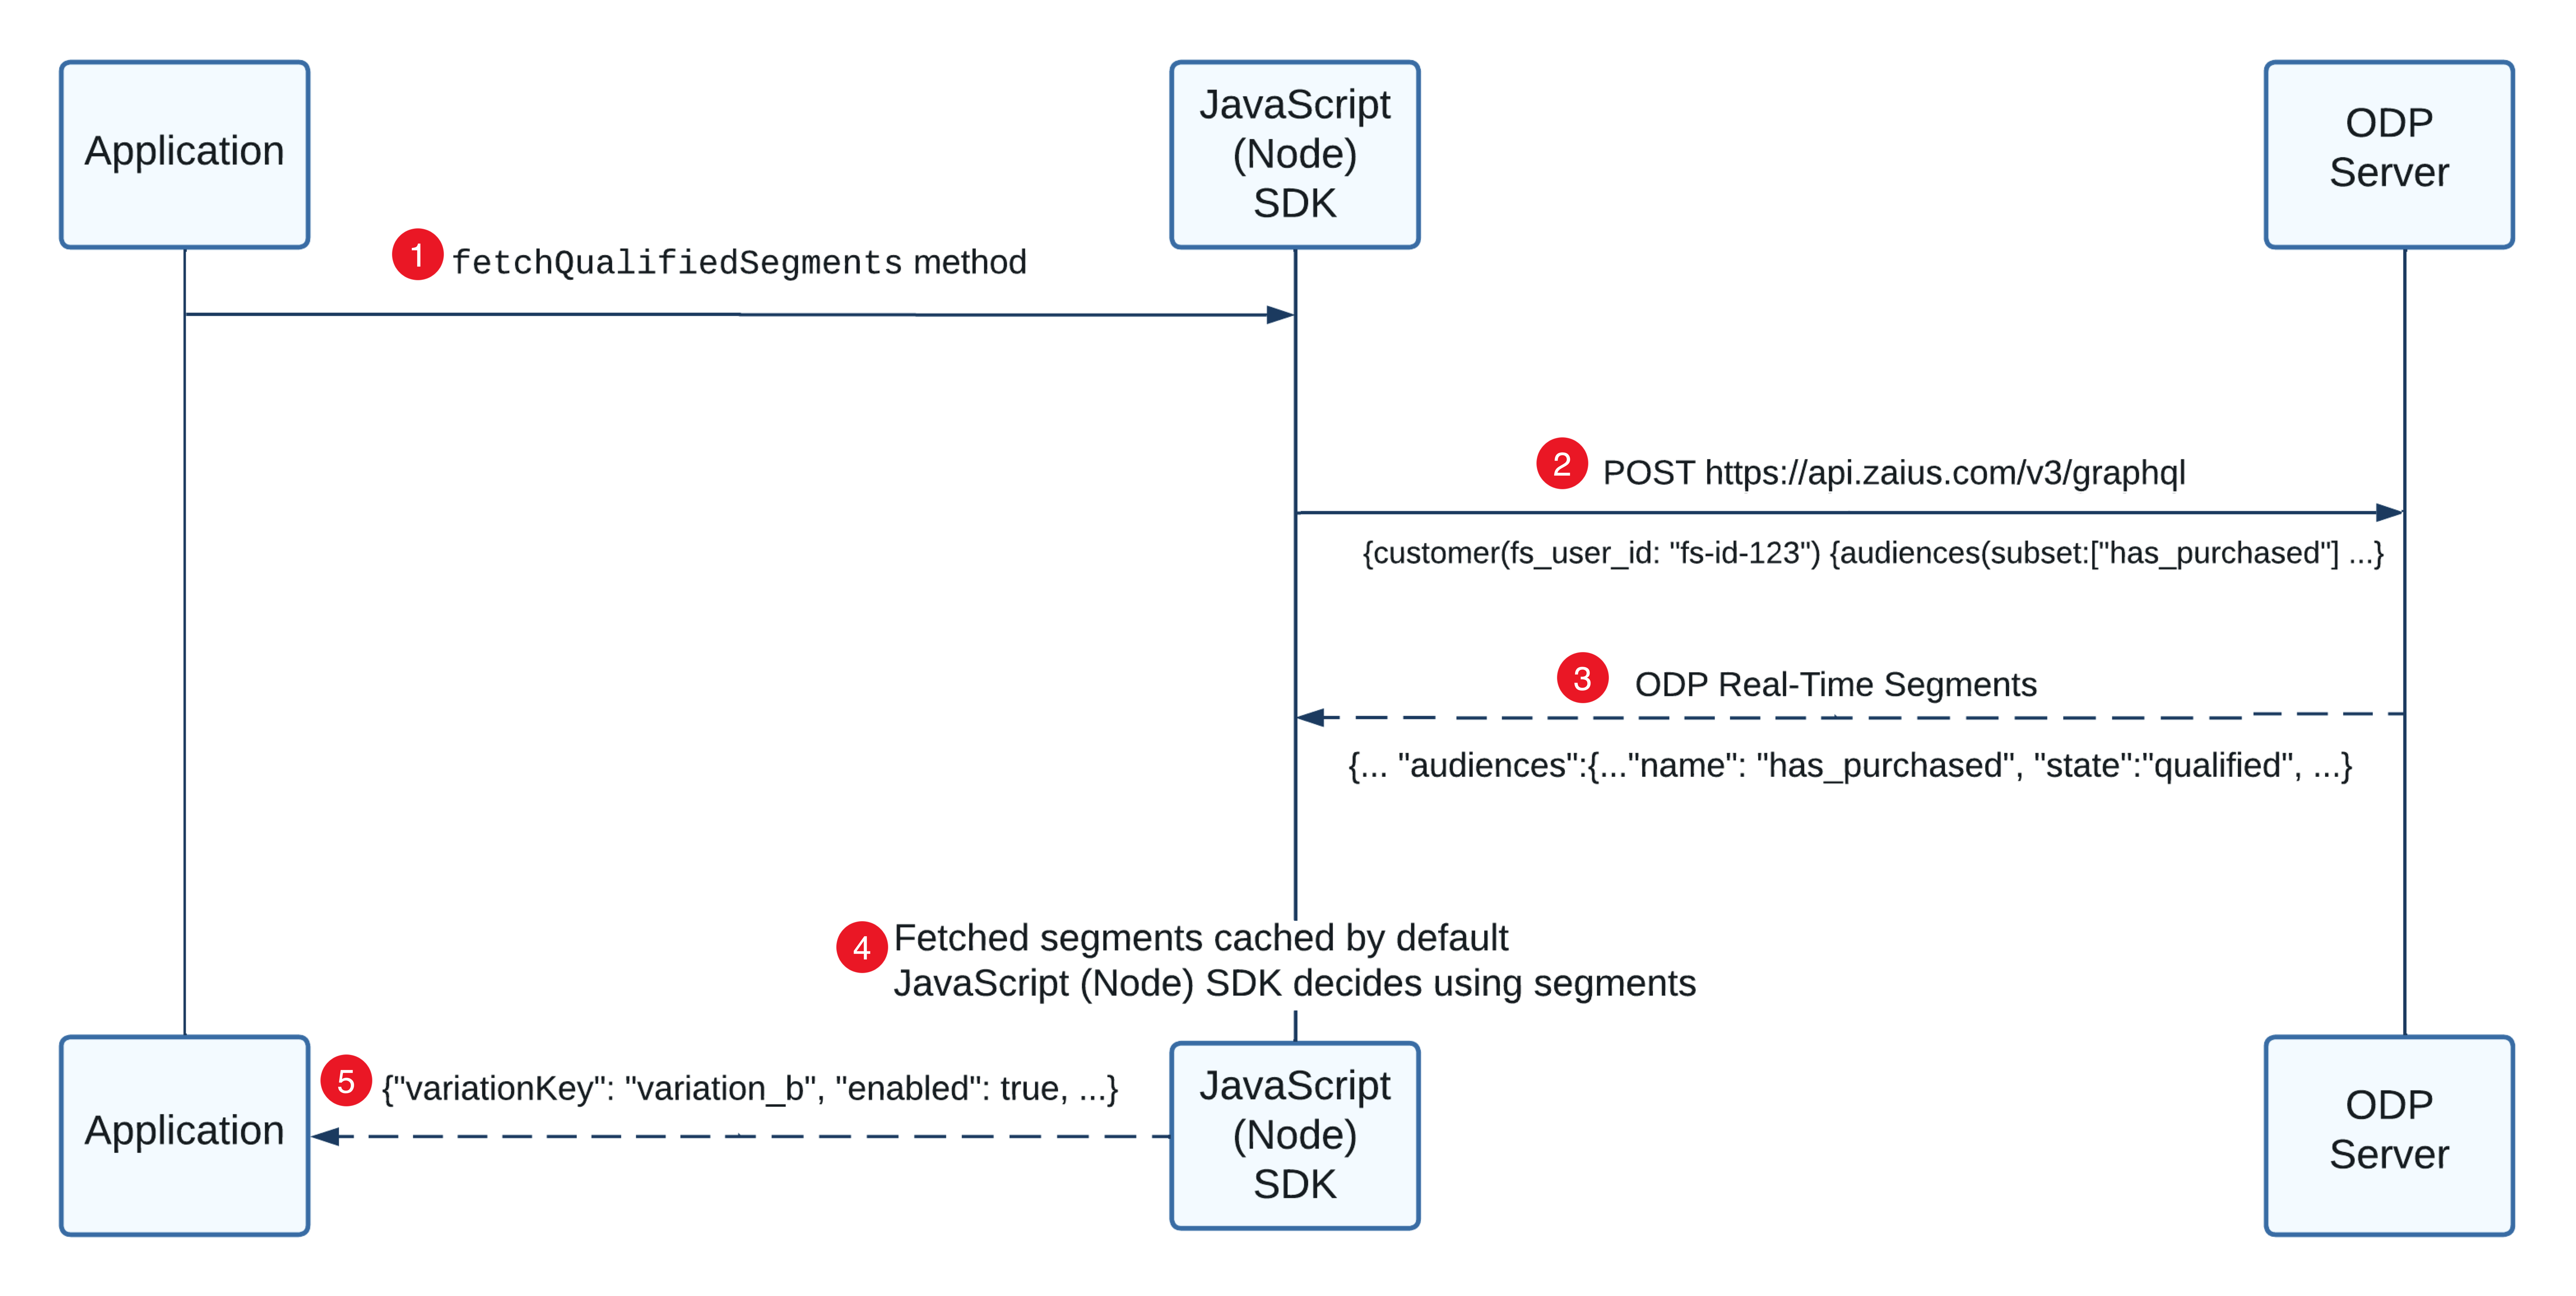 JavaScript (Node) fetchQualifiedSegments network diagram to ODP